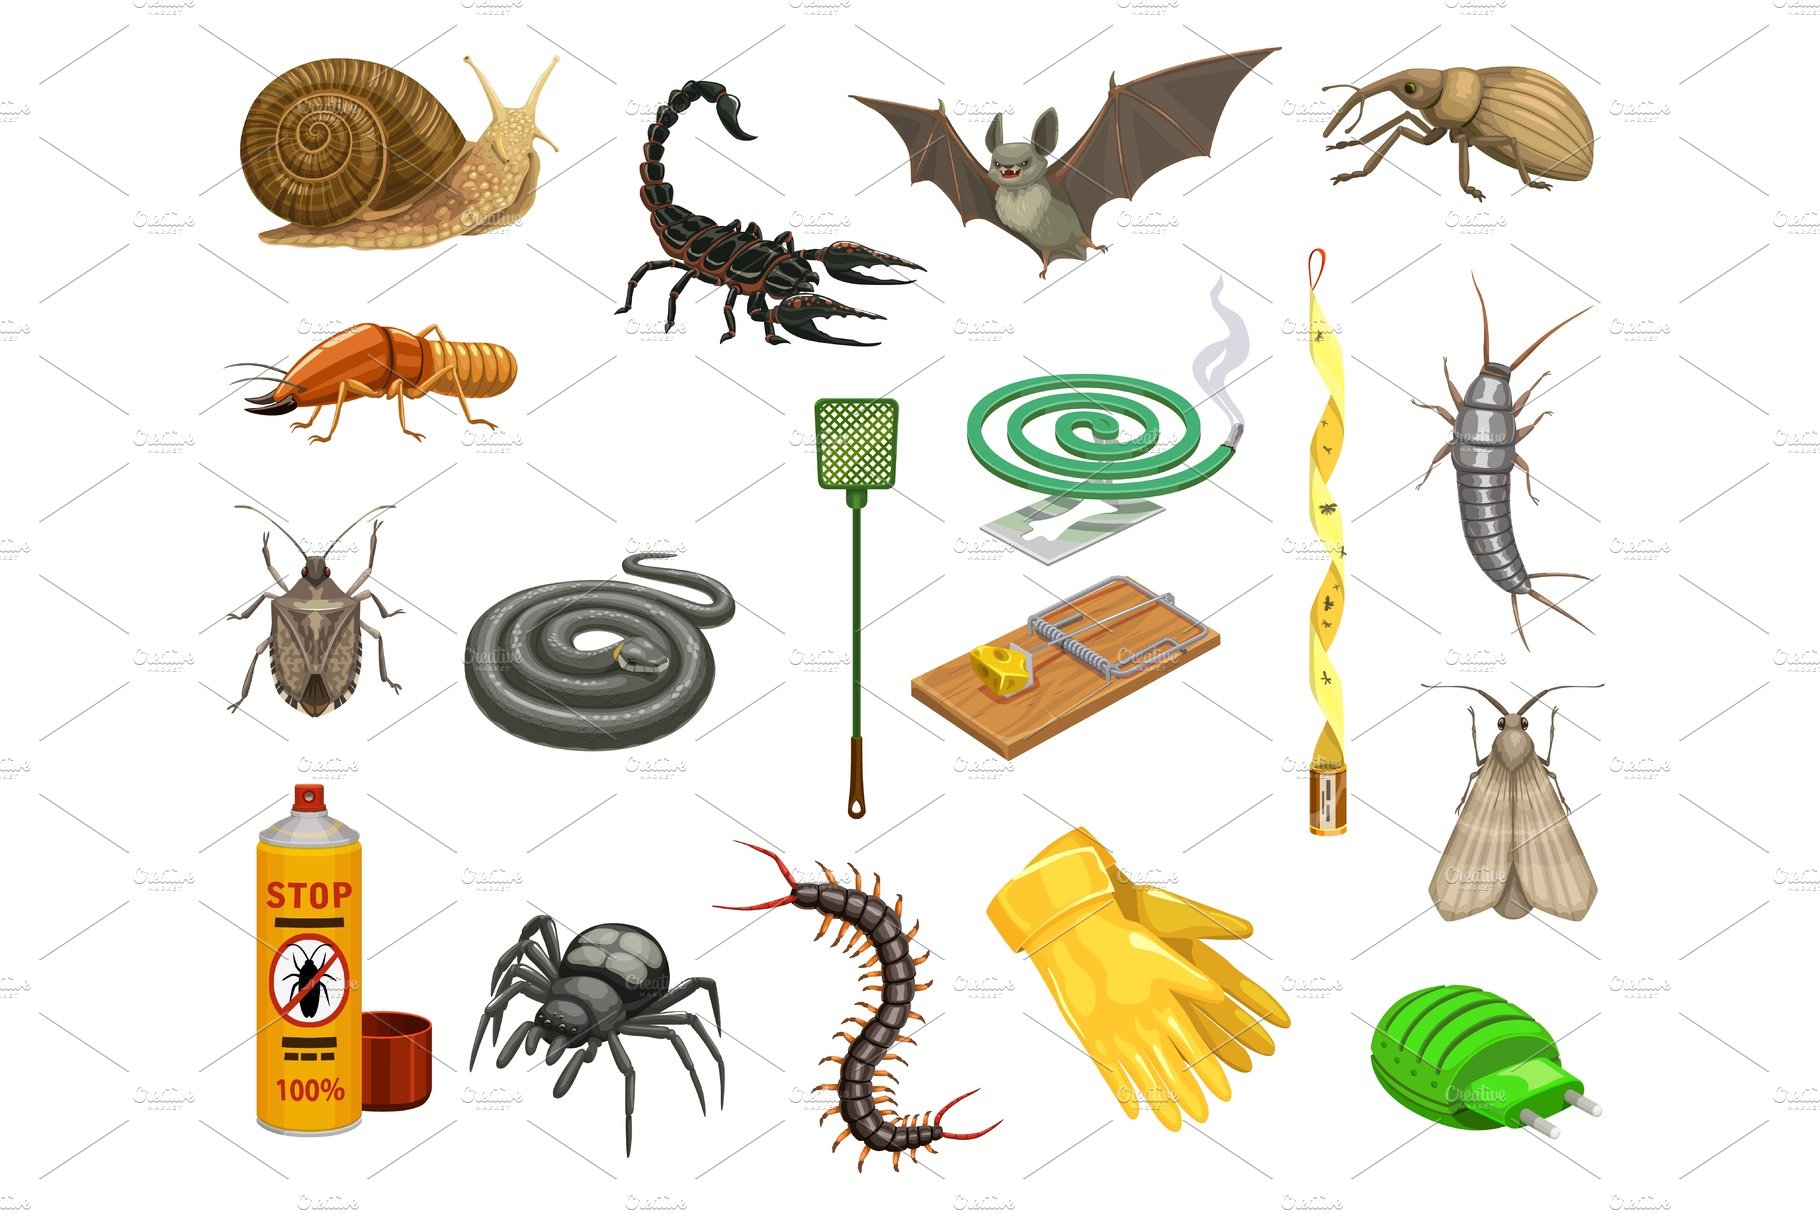 Pest insects, bugs, animals cover image.